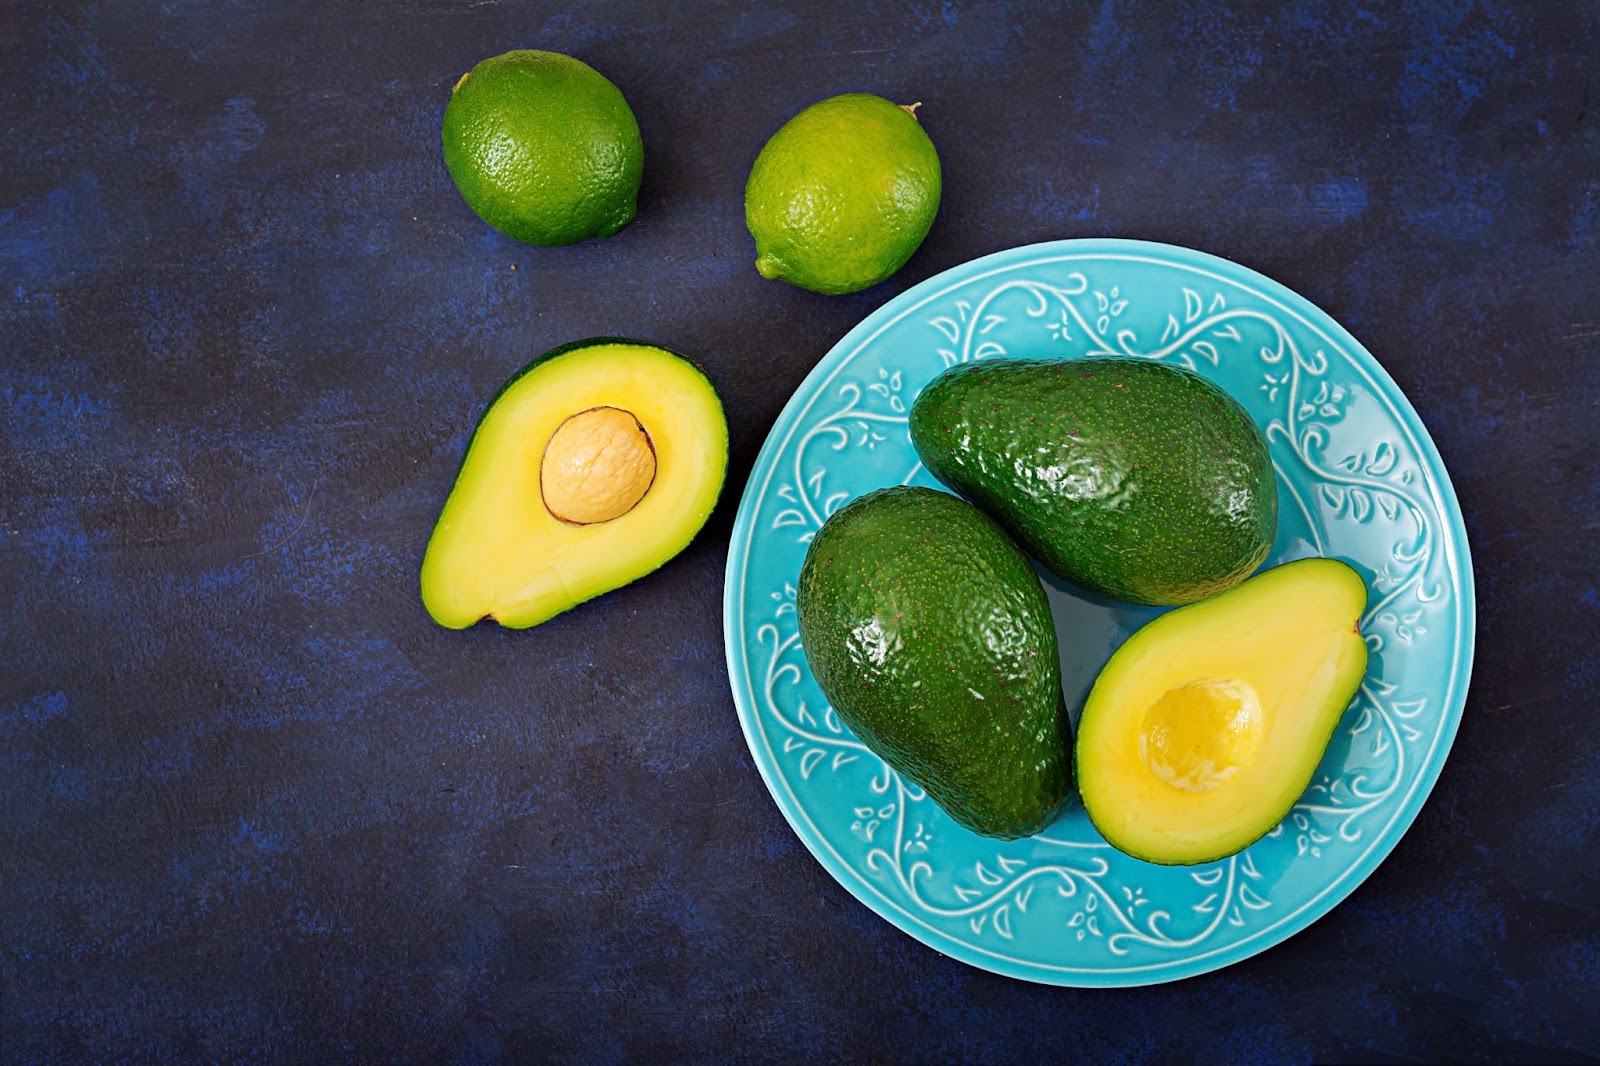 <p>Avocados, often called "nature's butter," are more than just a delicious addition to your meals; they're also a powerful ally for your skin. These creamy green gems are packed with healthy fats, vitamins E and C, and a variety of antioxidants that work together to nourish and protect your skin from the inside out.</p> <p>The healthy fats in avocados help to keep your skin hydrated and supple, while the vitamins E and C protect it from damage caused by free radicals and the sun's harmful rays. Additionally, avocados contain nutrients that support collagen production, a protein that is essential for maintaining skin firmness and elasticity. So next time you're looking for a healthy snack or meal addition, reach for an avocado and enjoy the many benefits it offers for both your taste buds and your skin.</p>